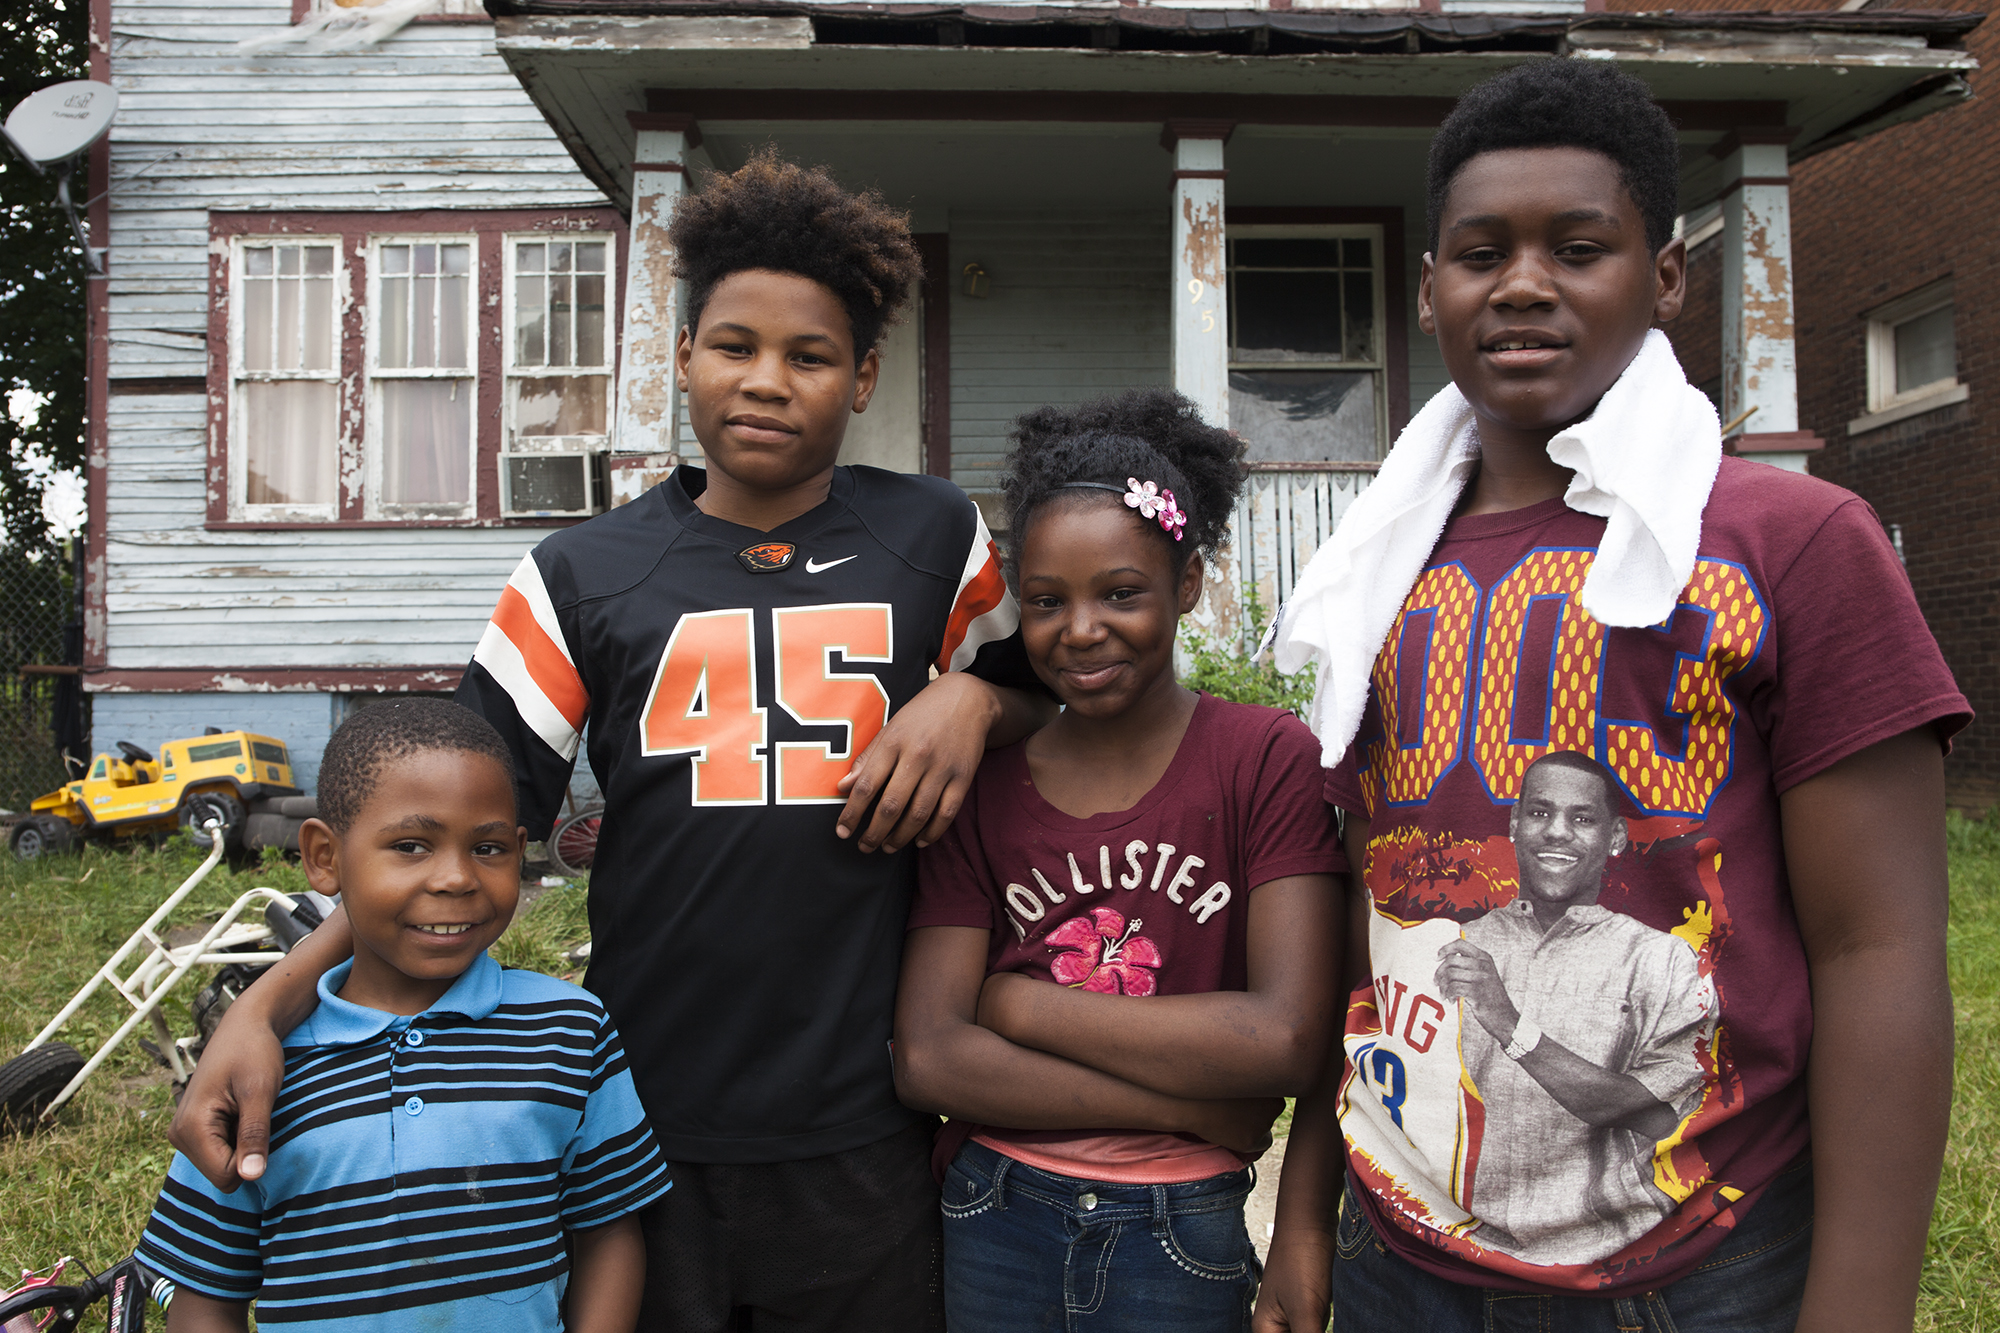 Lashanda Mayberry's children attended a Highland Park, Michigan, charter school, one of the few schools left in the suburb. Mayberry's children, pictured from right, are Tazeon, 15, Myaira, 11, and Keon, 13. Also pictured is Mayberry's nephew, Armani, 7. (Jeffrey Pierre/News21)